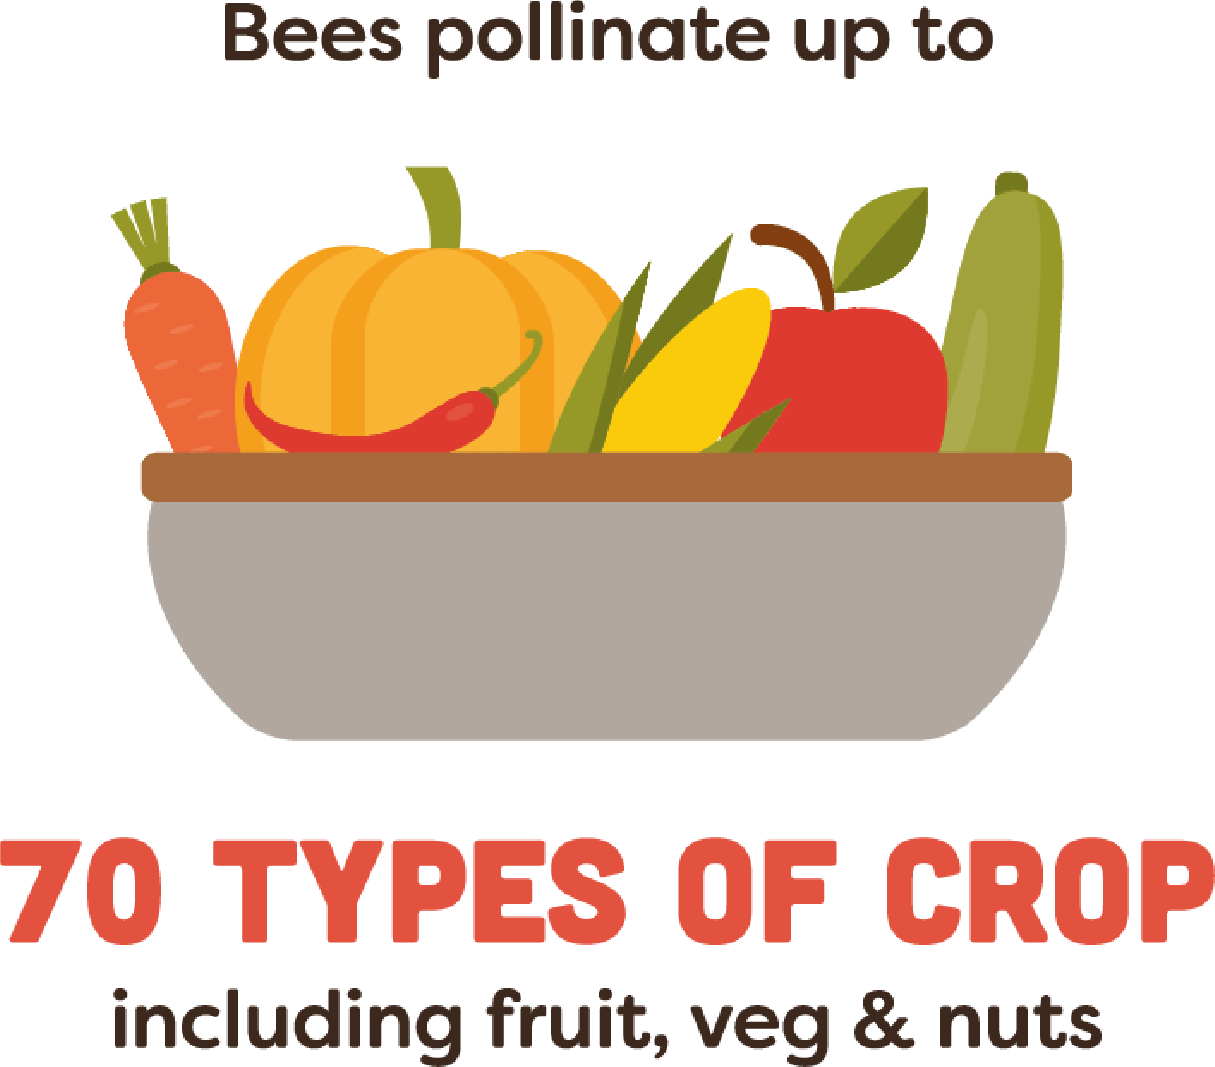 Bees pollinate up to 70 types of crop including fruit, veg & nuts